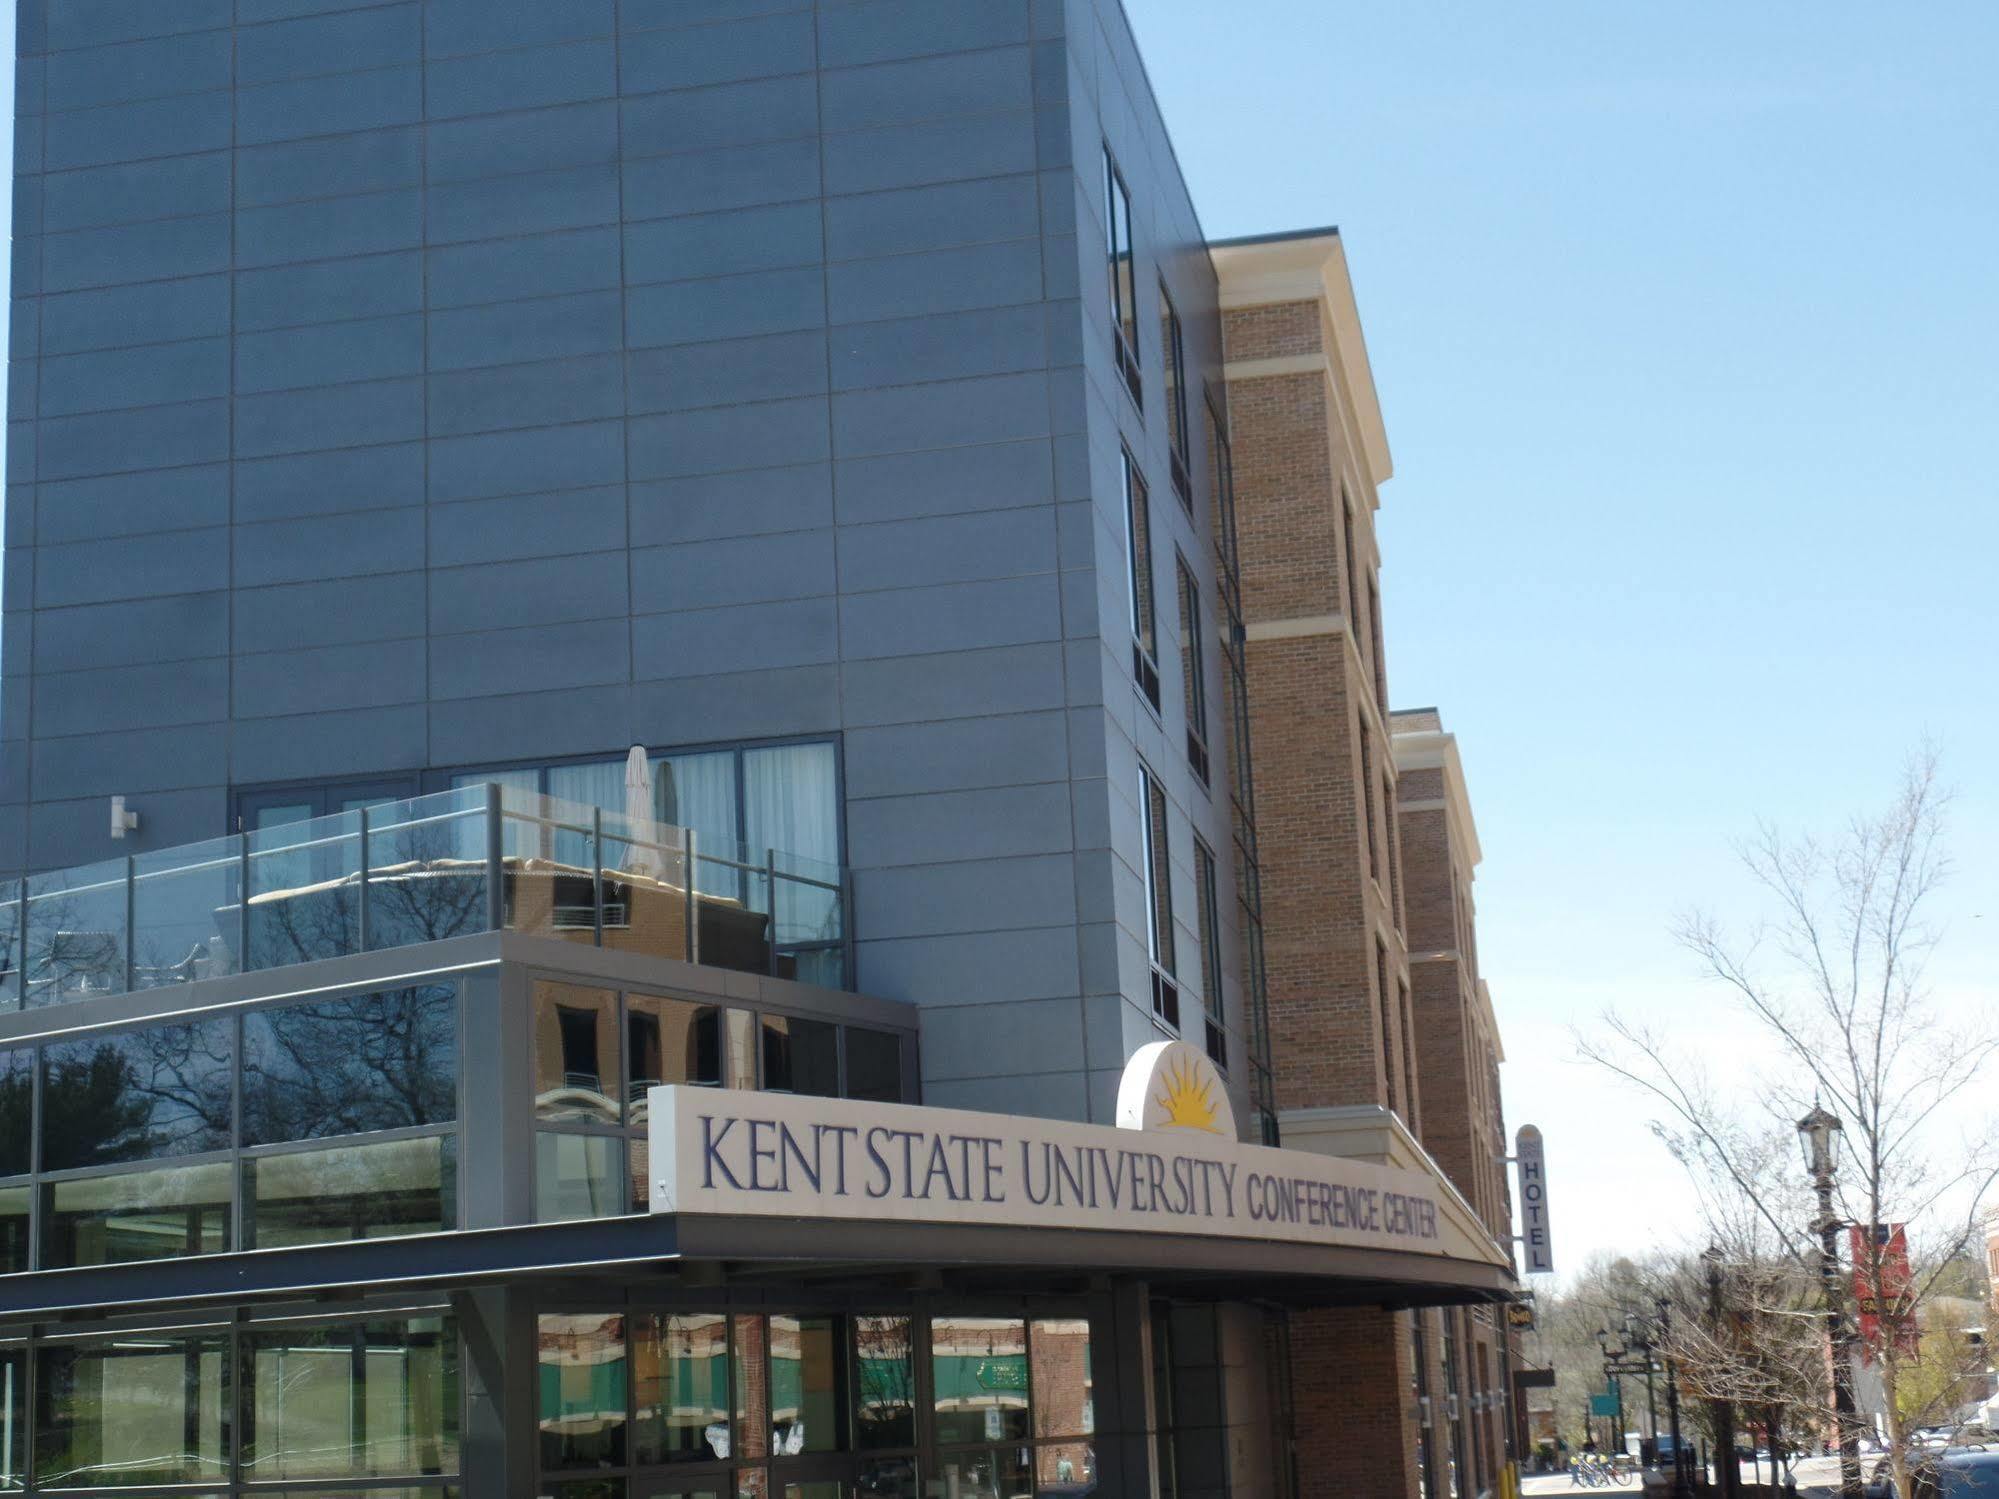 Kent State University Hotel And Conference Center ภายนอก รูปภาพ